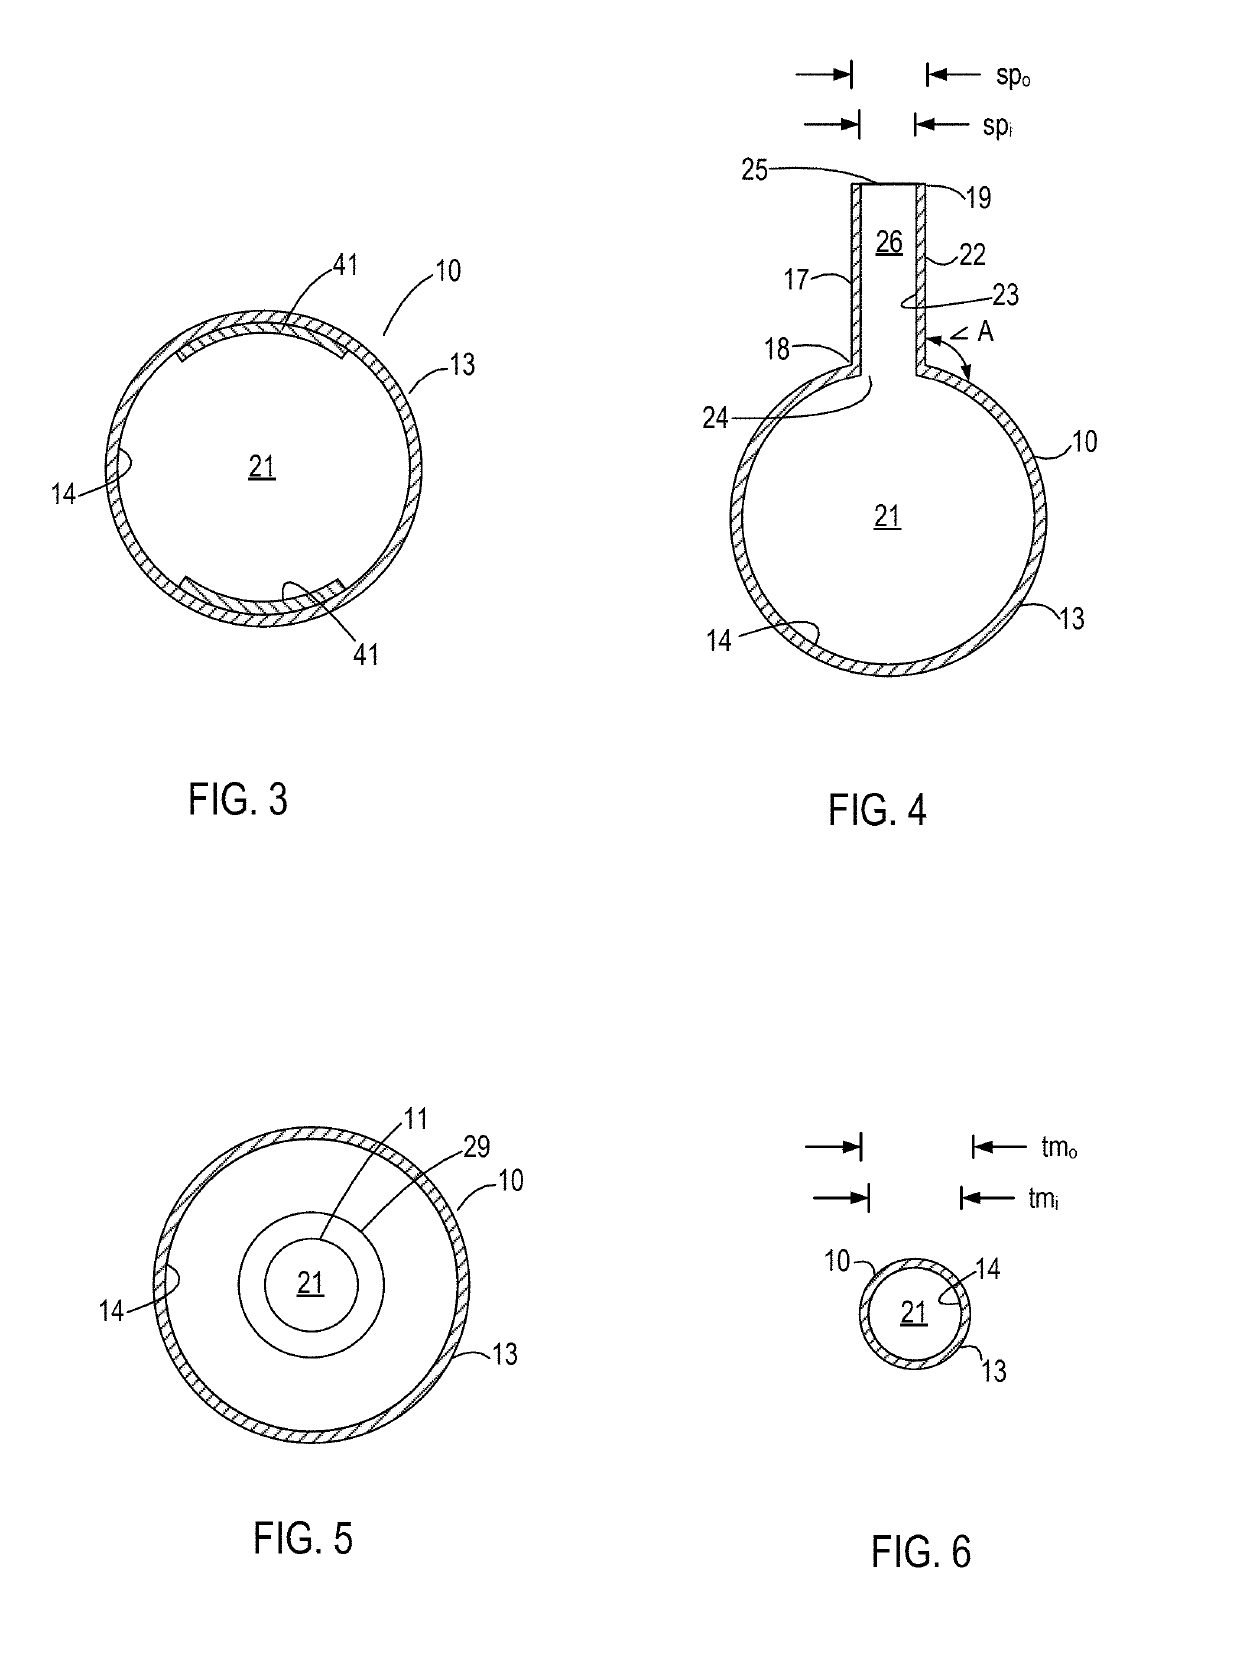 Condom catheters and methods of making and using the same